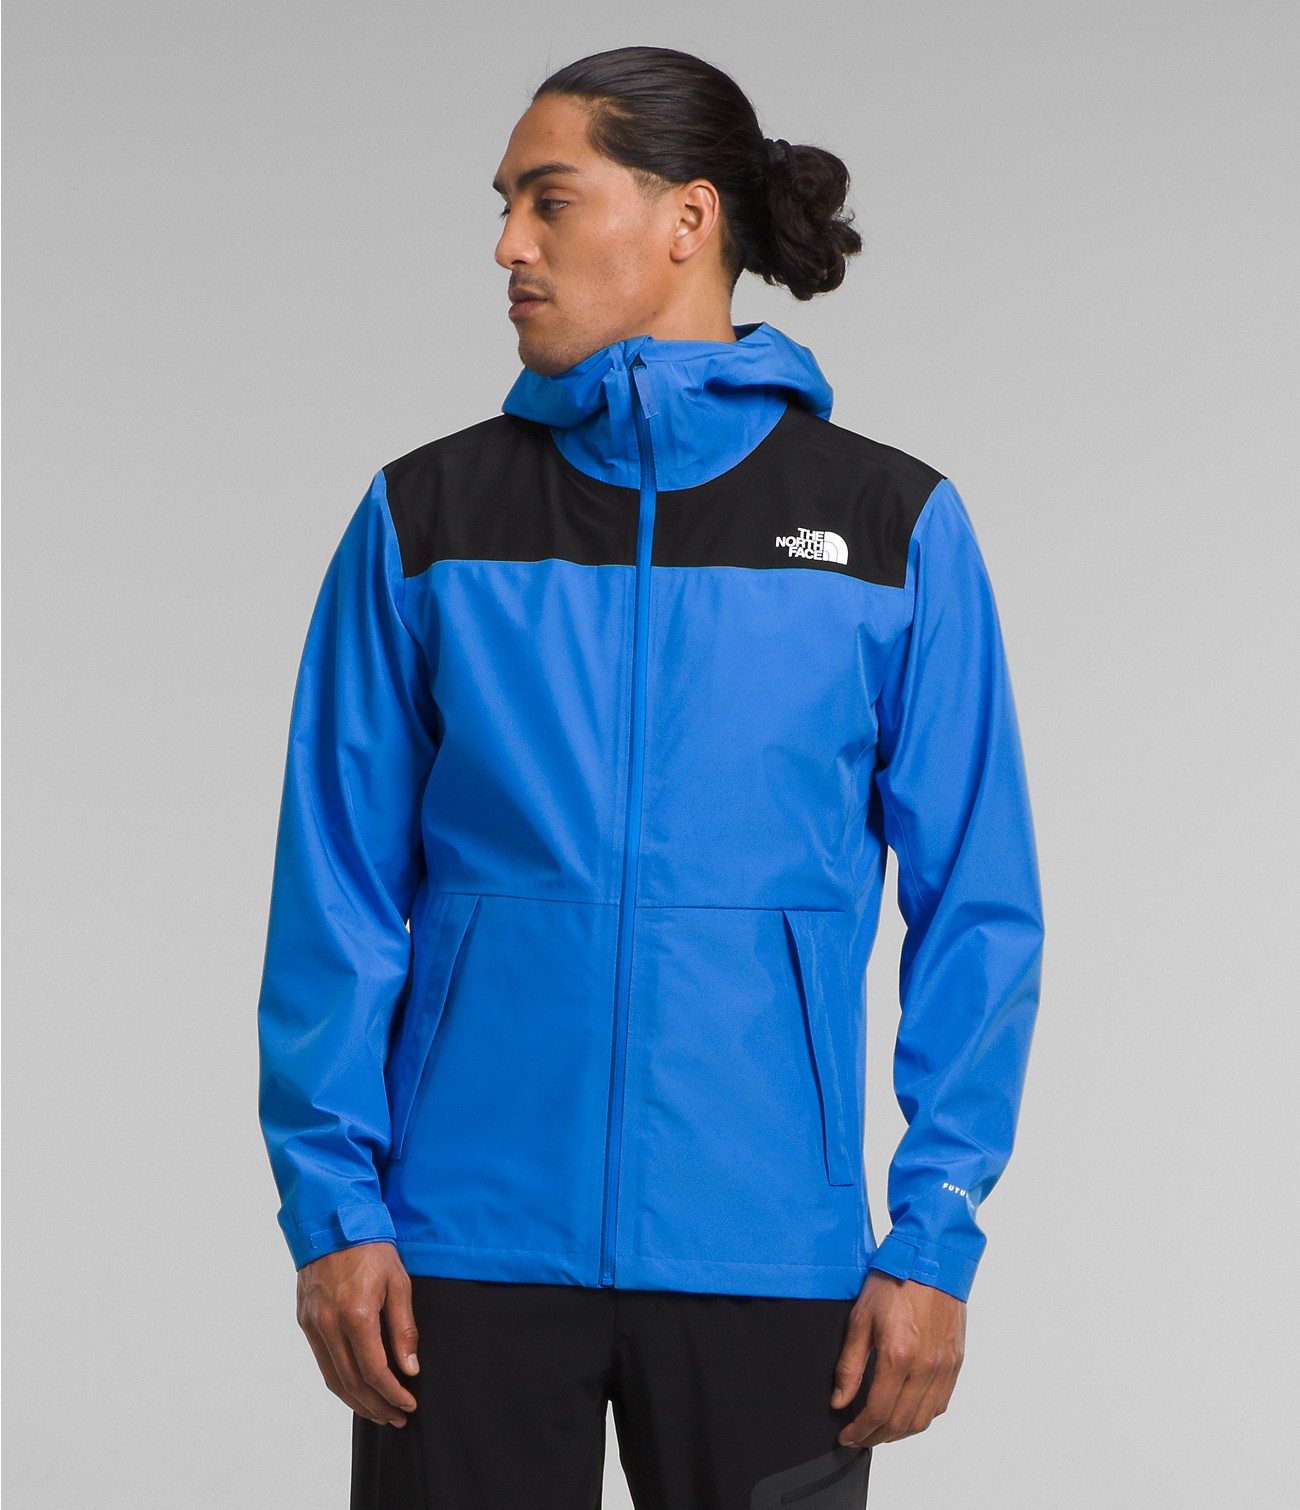 Unlock Wilderness' choice in the Montbell Vs North Face comparison, the Dryzzle FUTURELIGHT™ Jacket by The North Face